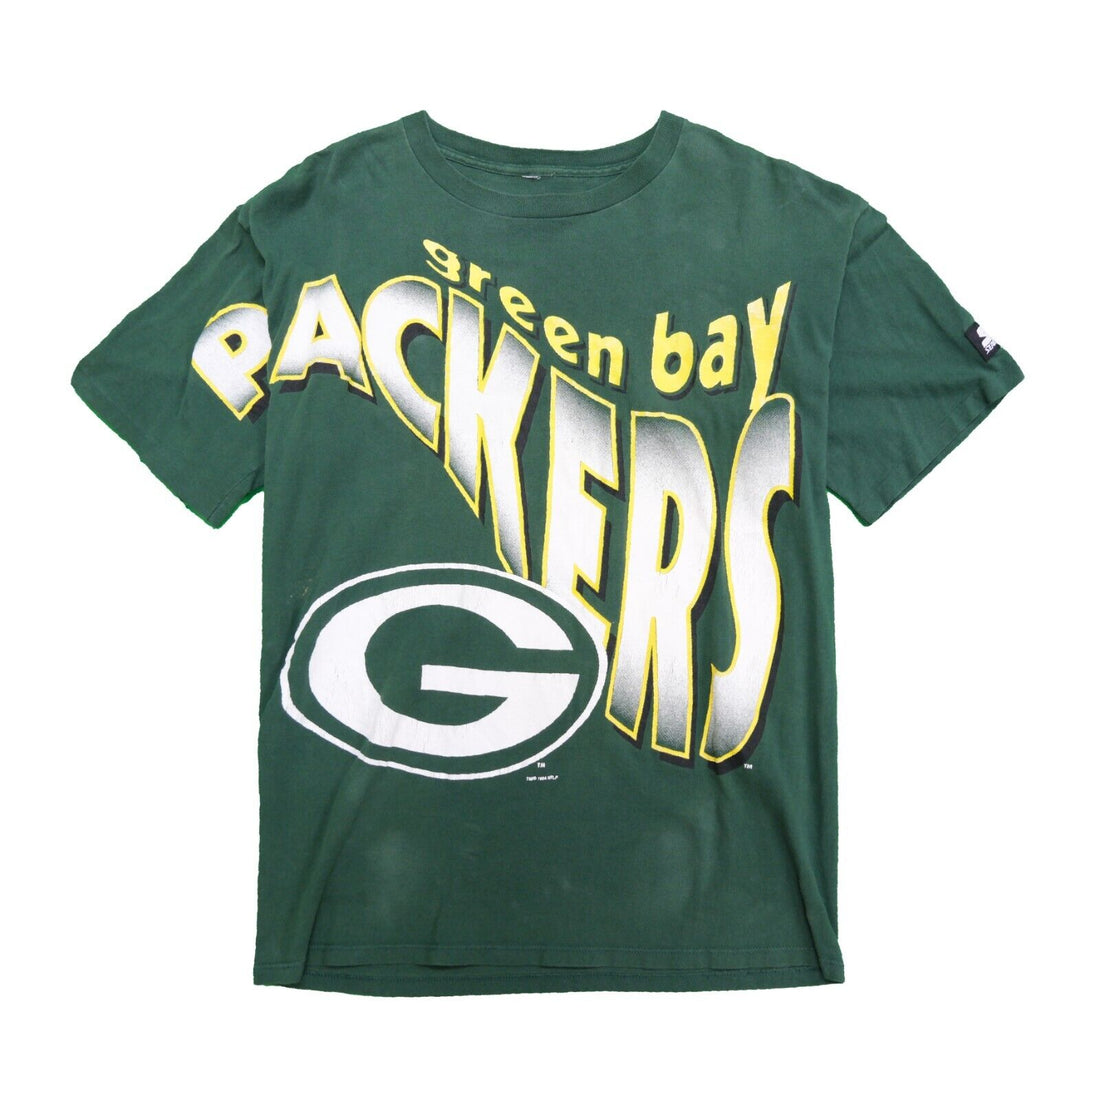 Vintage Green Bay Packers Spell Out T-Shirt Large Size 1994 90s NFL